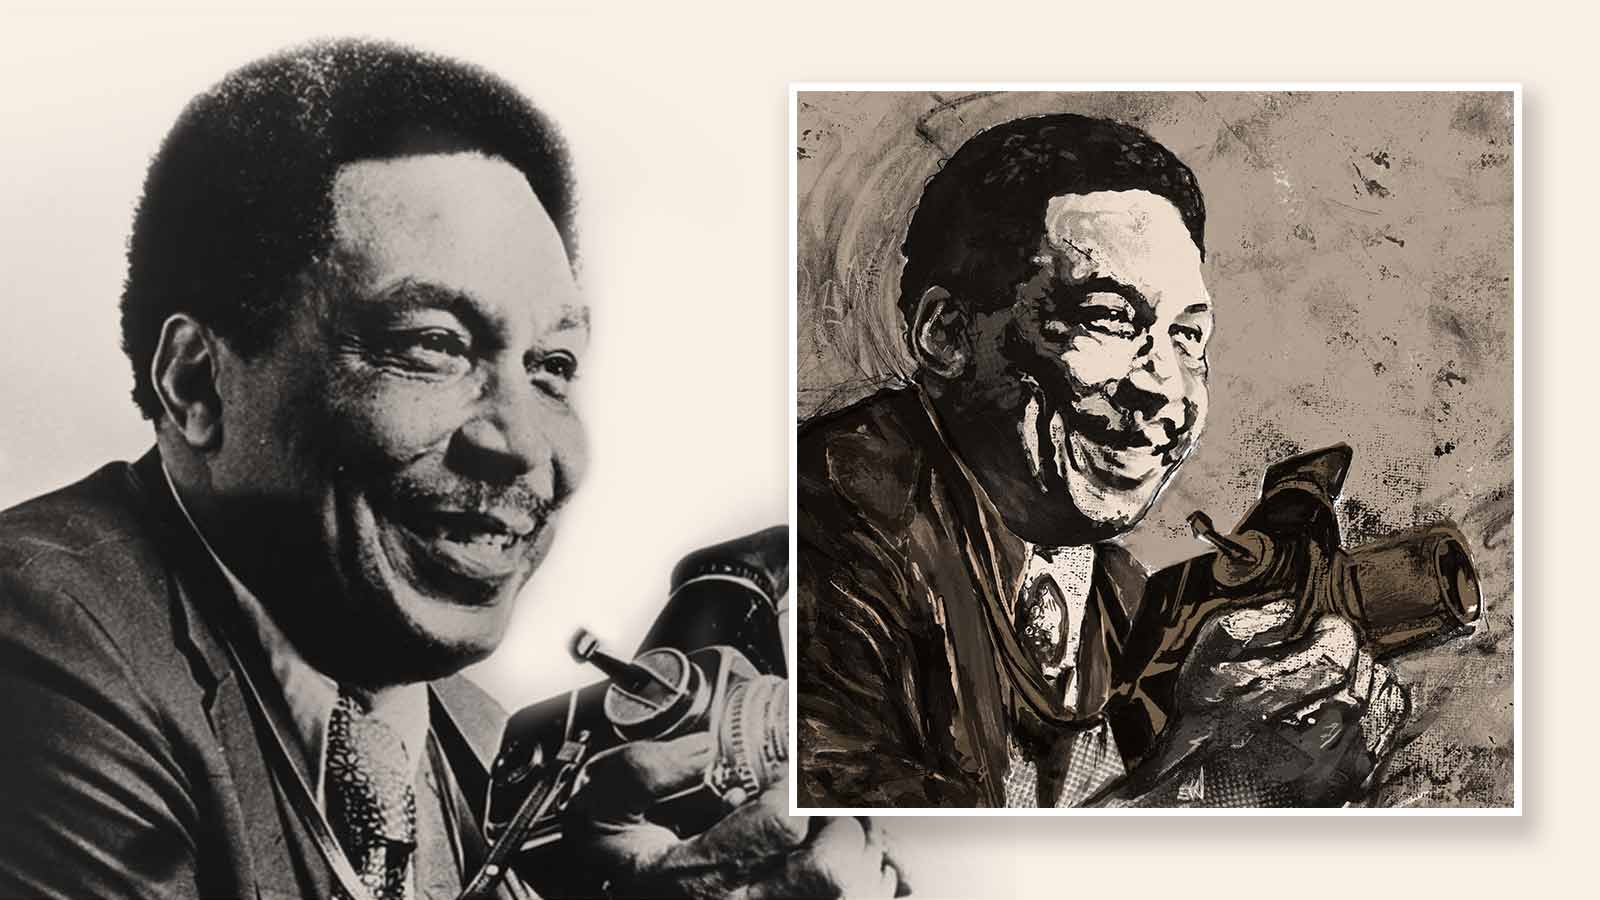 A sepia-tone image of Ernest Withers in a suit and tie holding a vintage camera next to an artistic rendering of the photo.